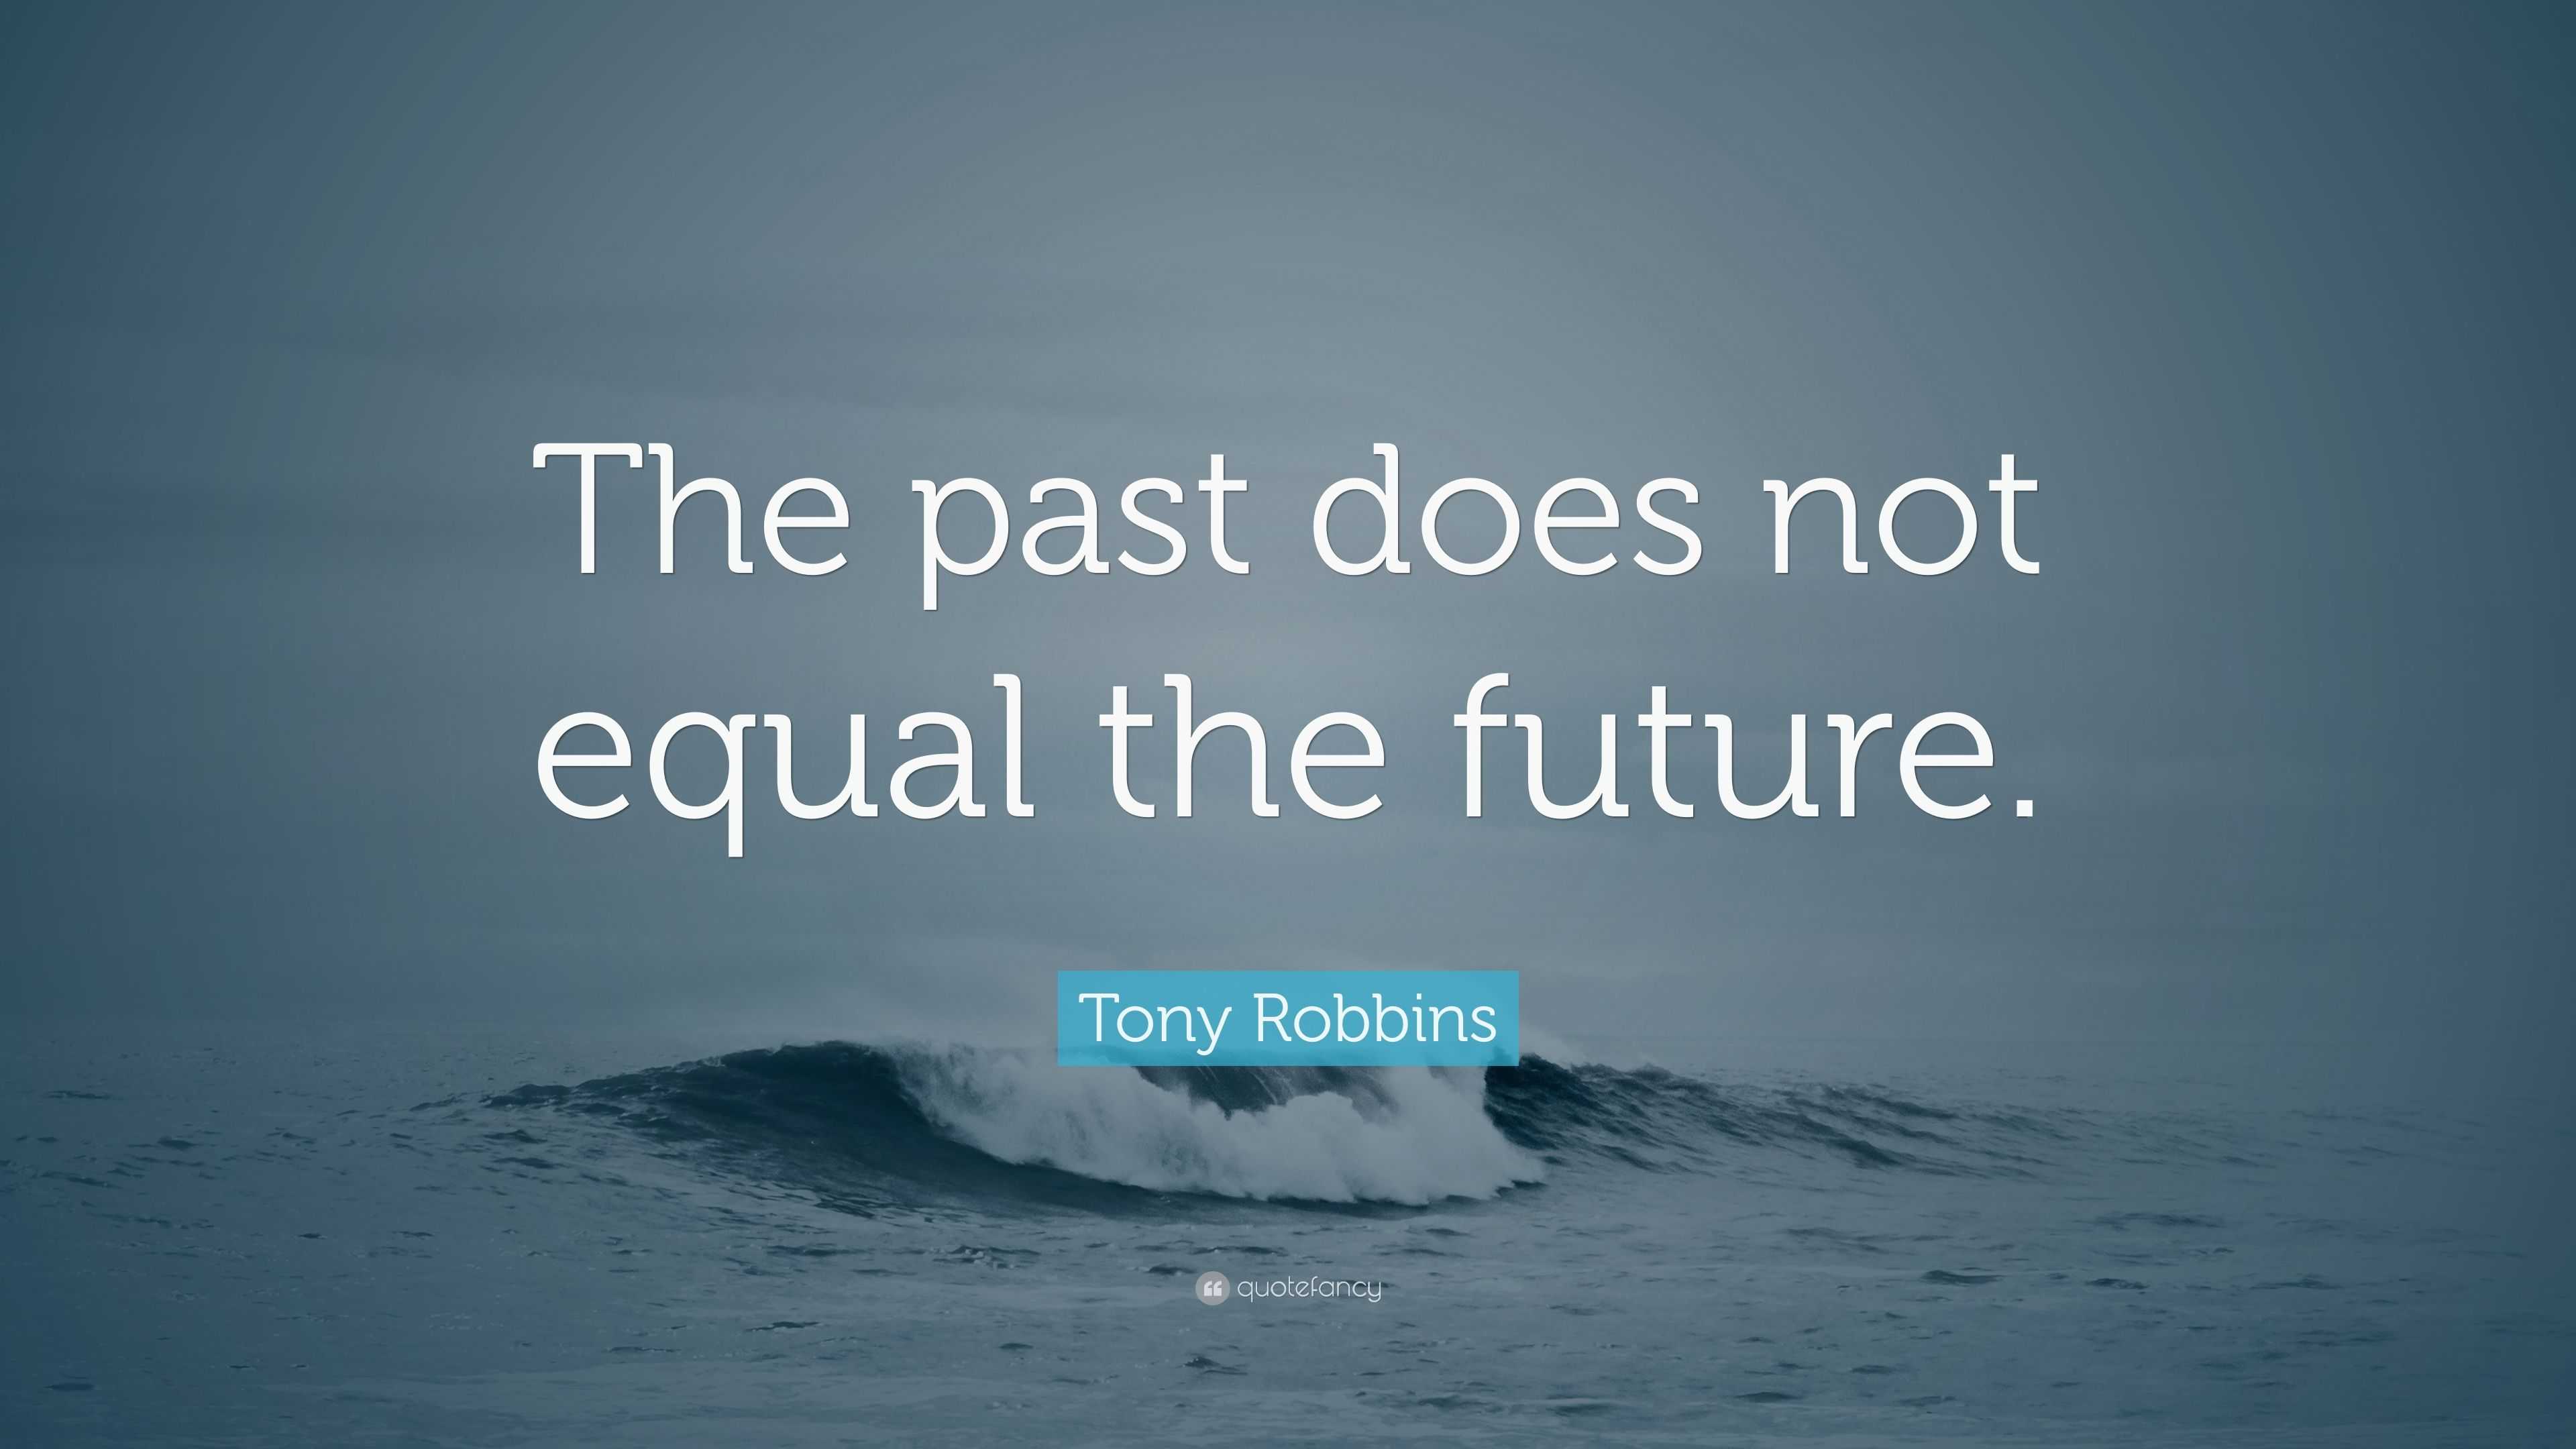 Tony Robbins Quote: “The past does not equal the future.”